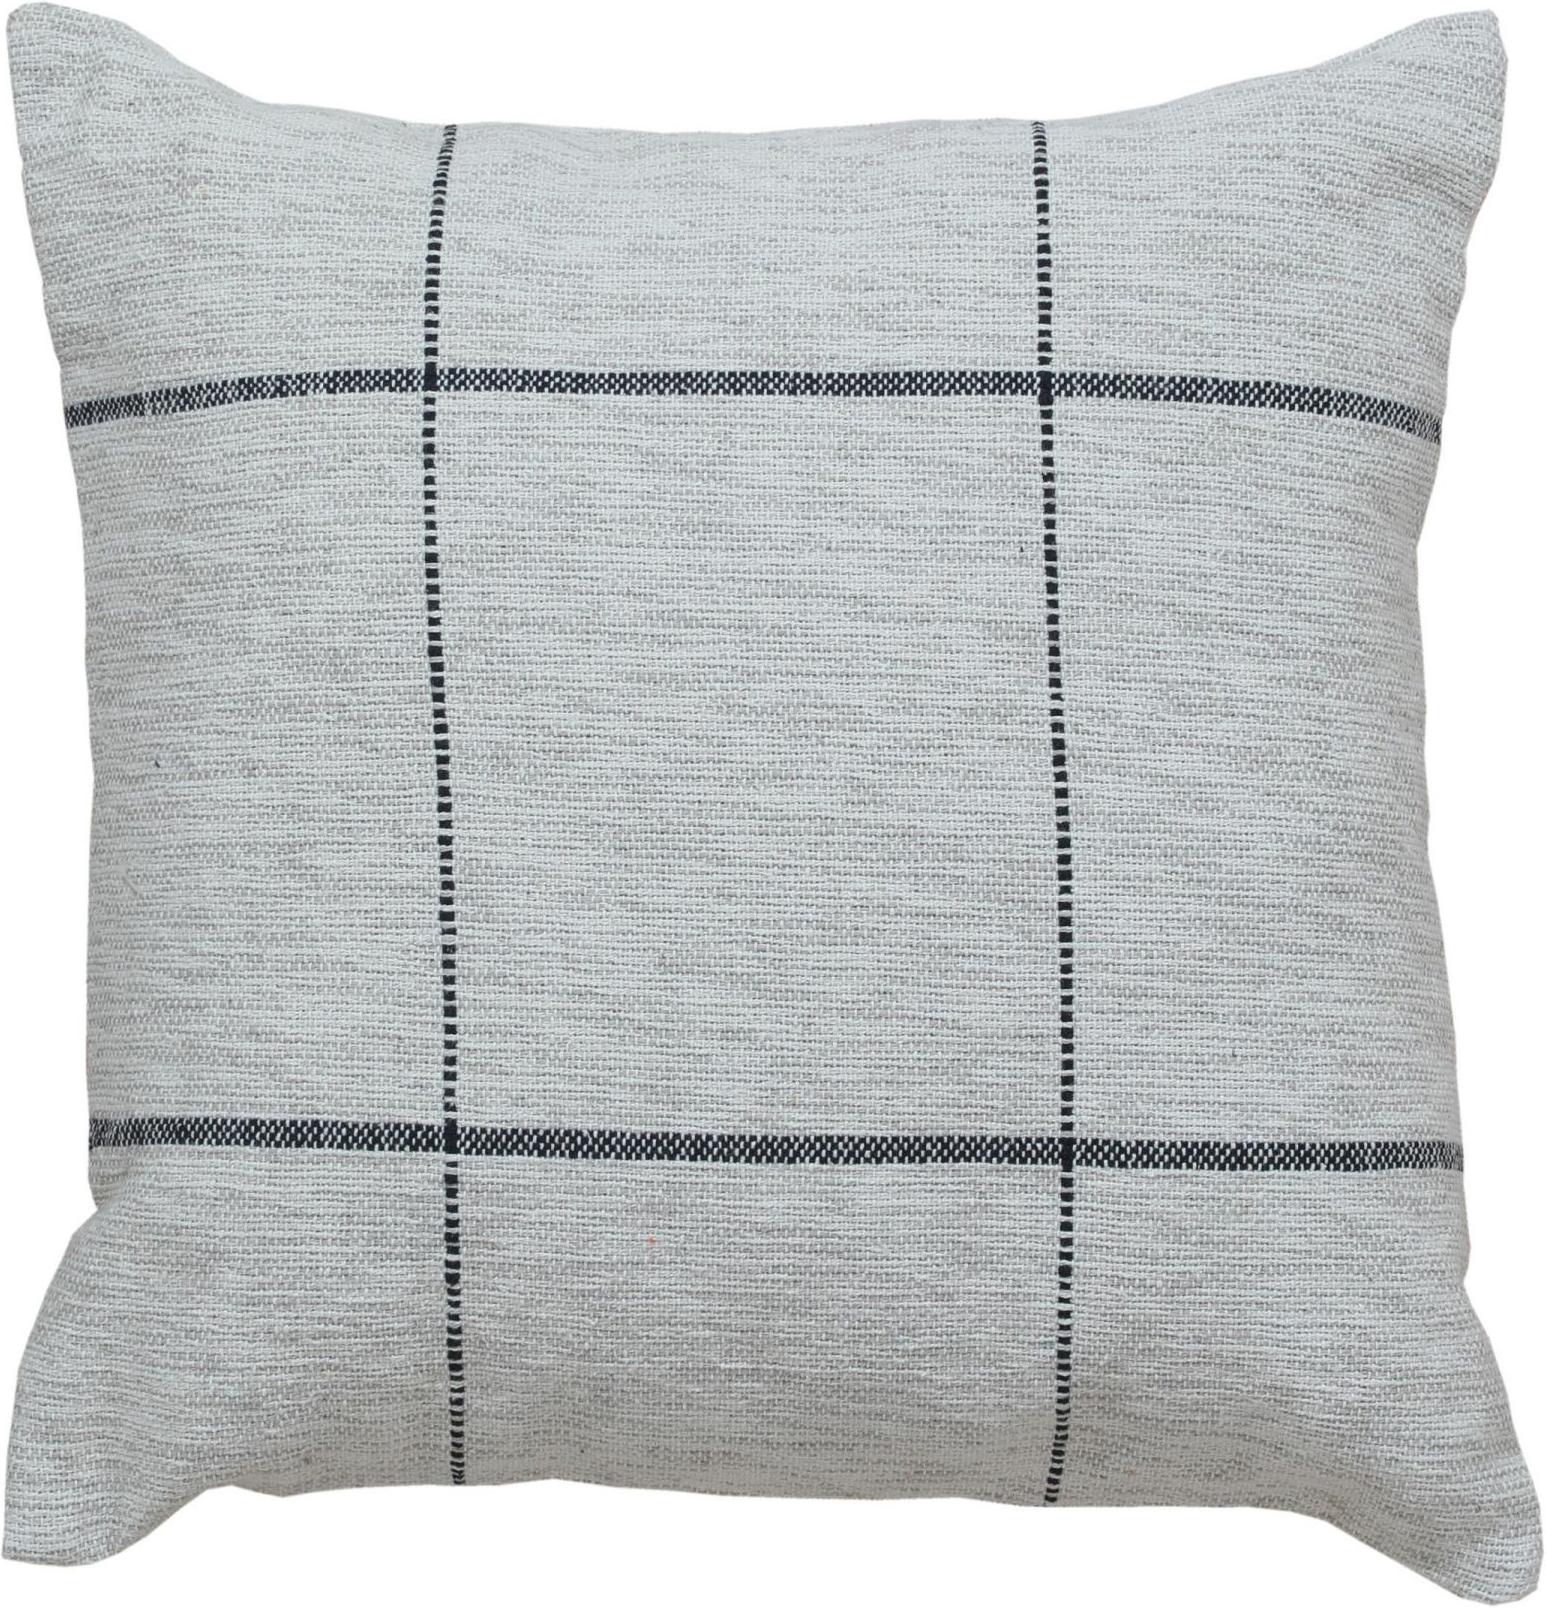 Hand-Knotted Contemporary Wool and Cotton Pillow In Gray and Beige with Geometric Parttern For Sale